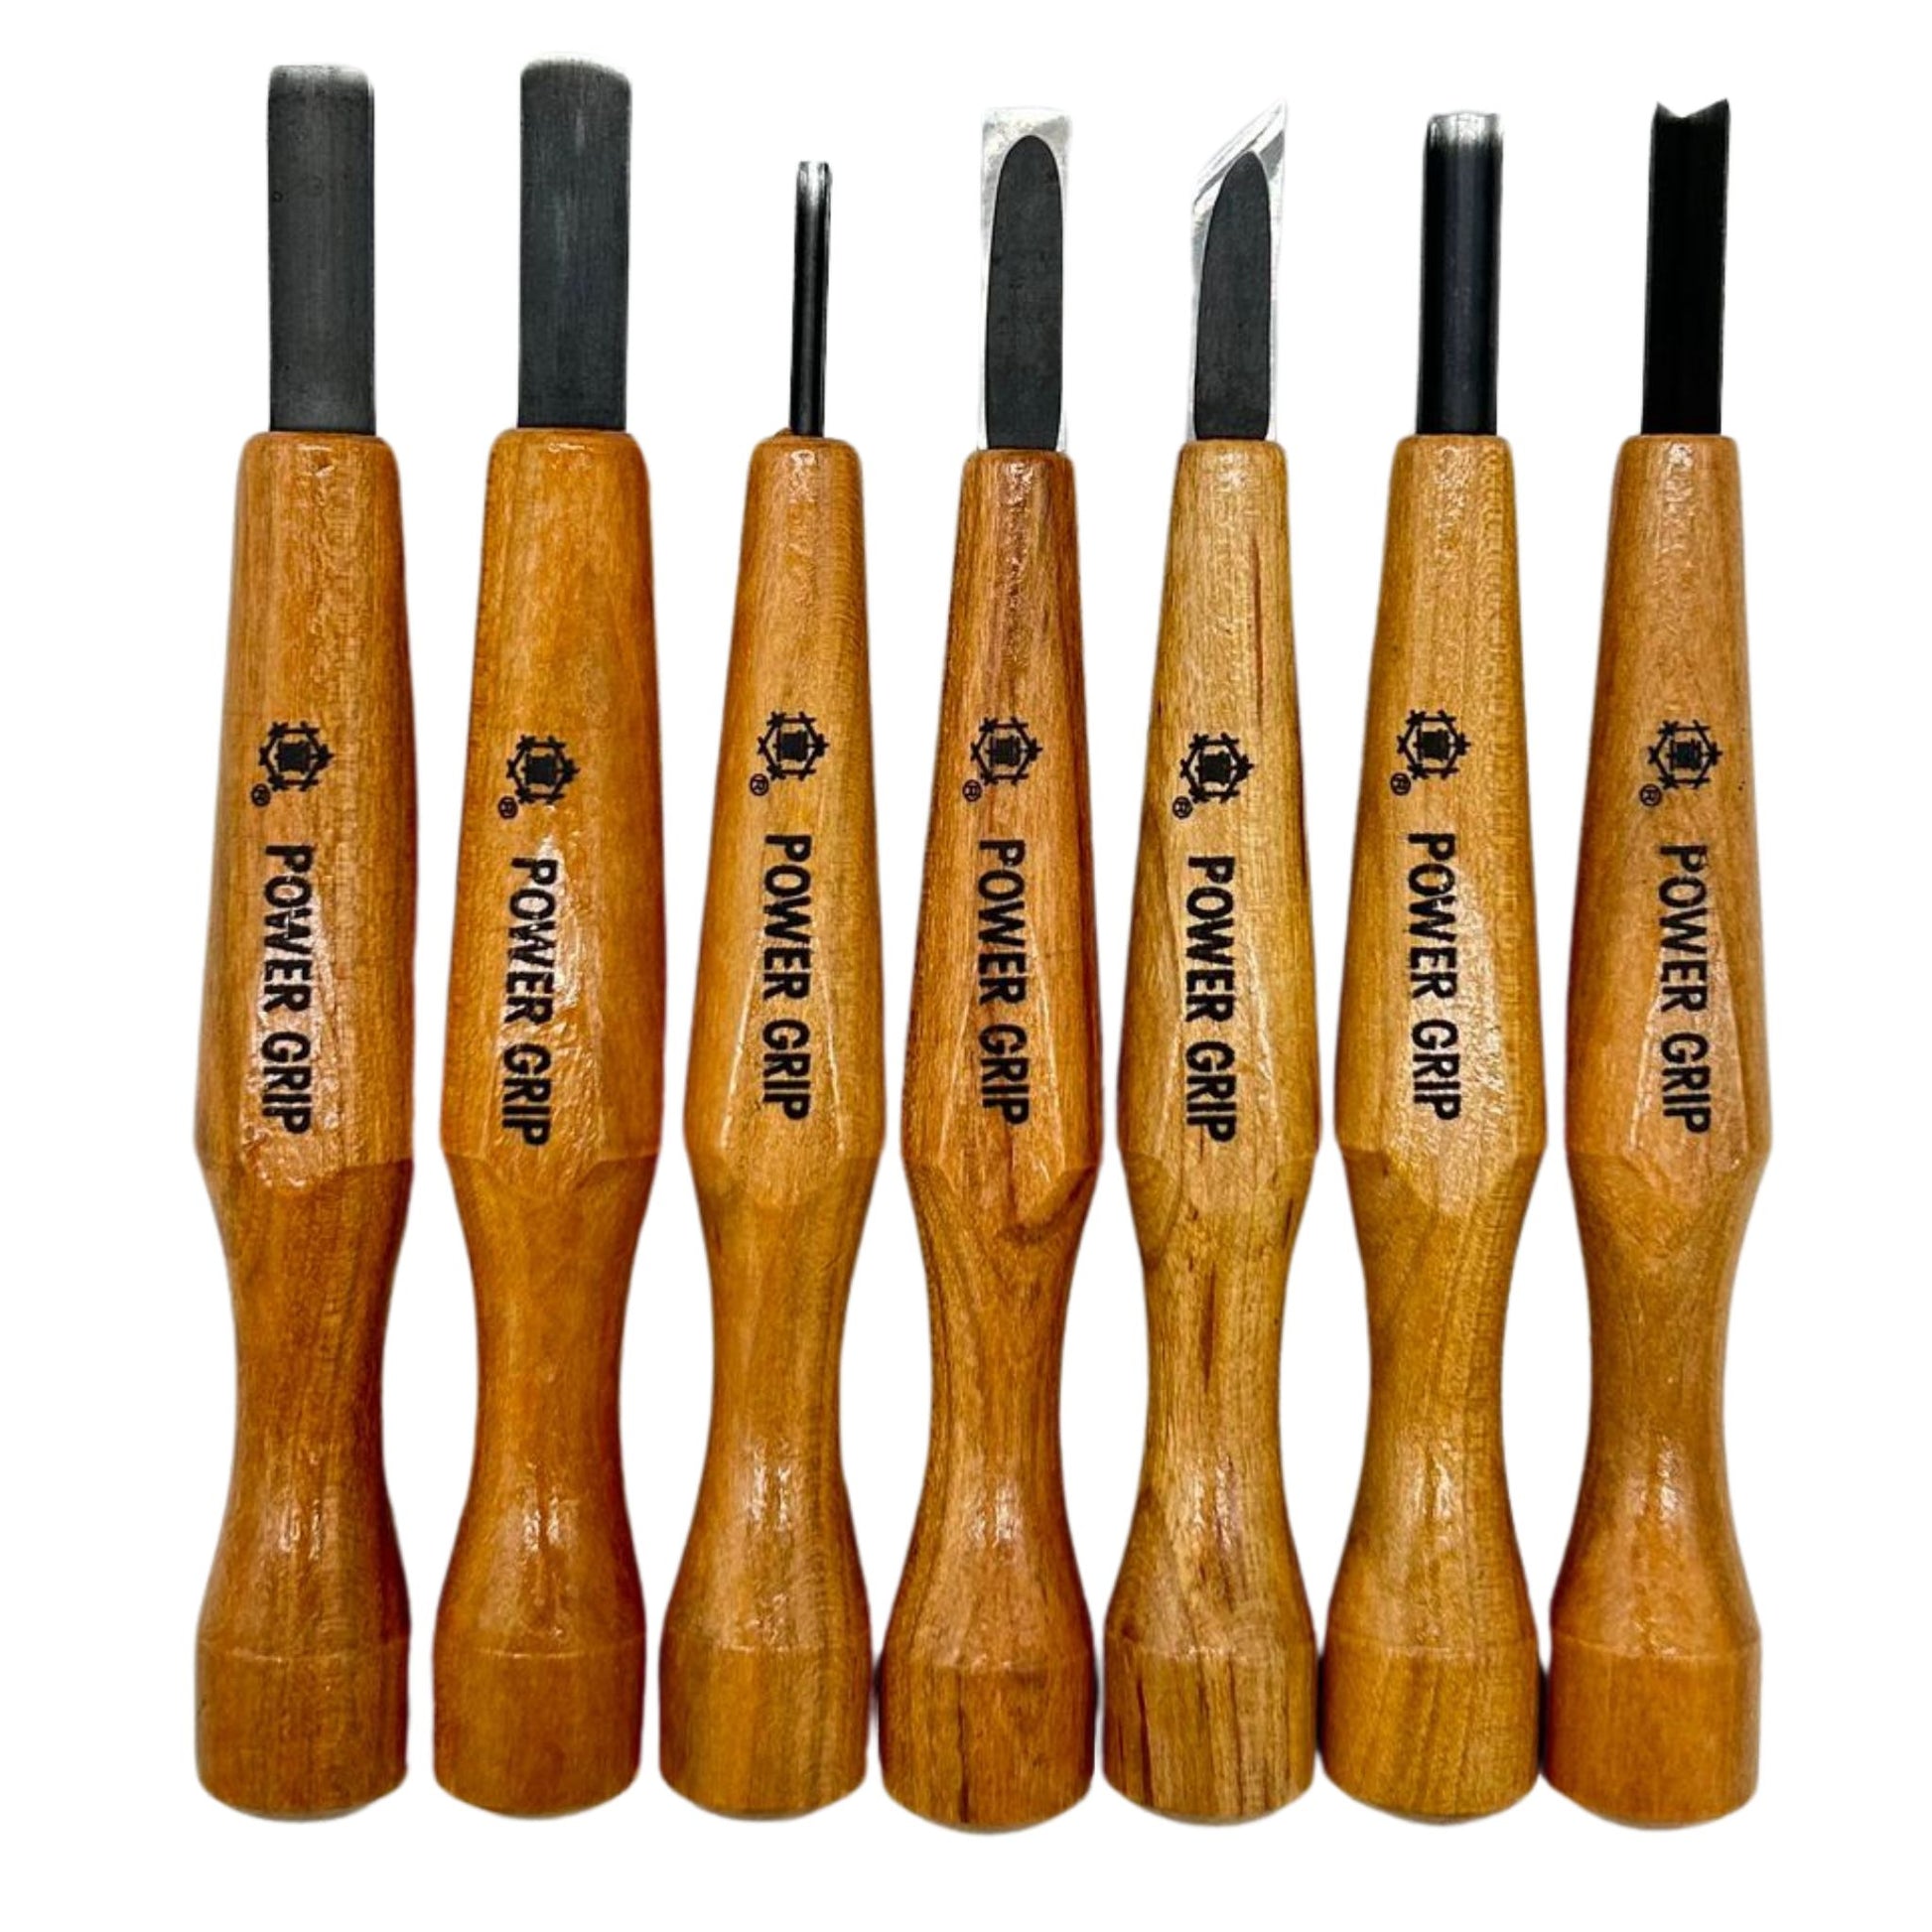 Mikisyo 7pcs Power Grip Wood Carving Tool Kit Chisel Set Made in